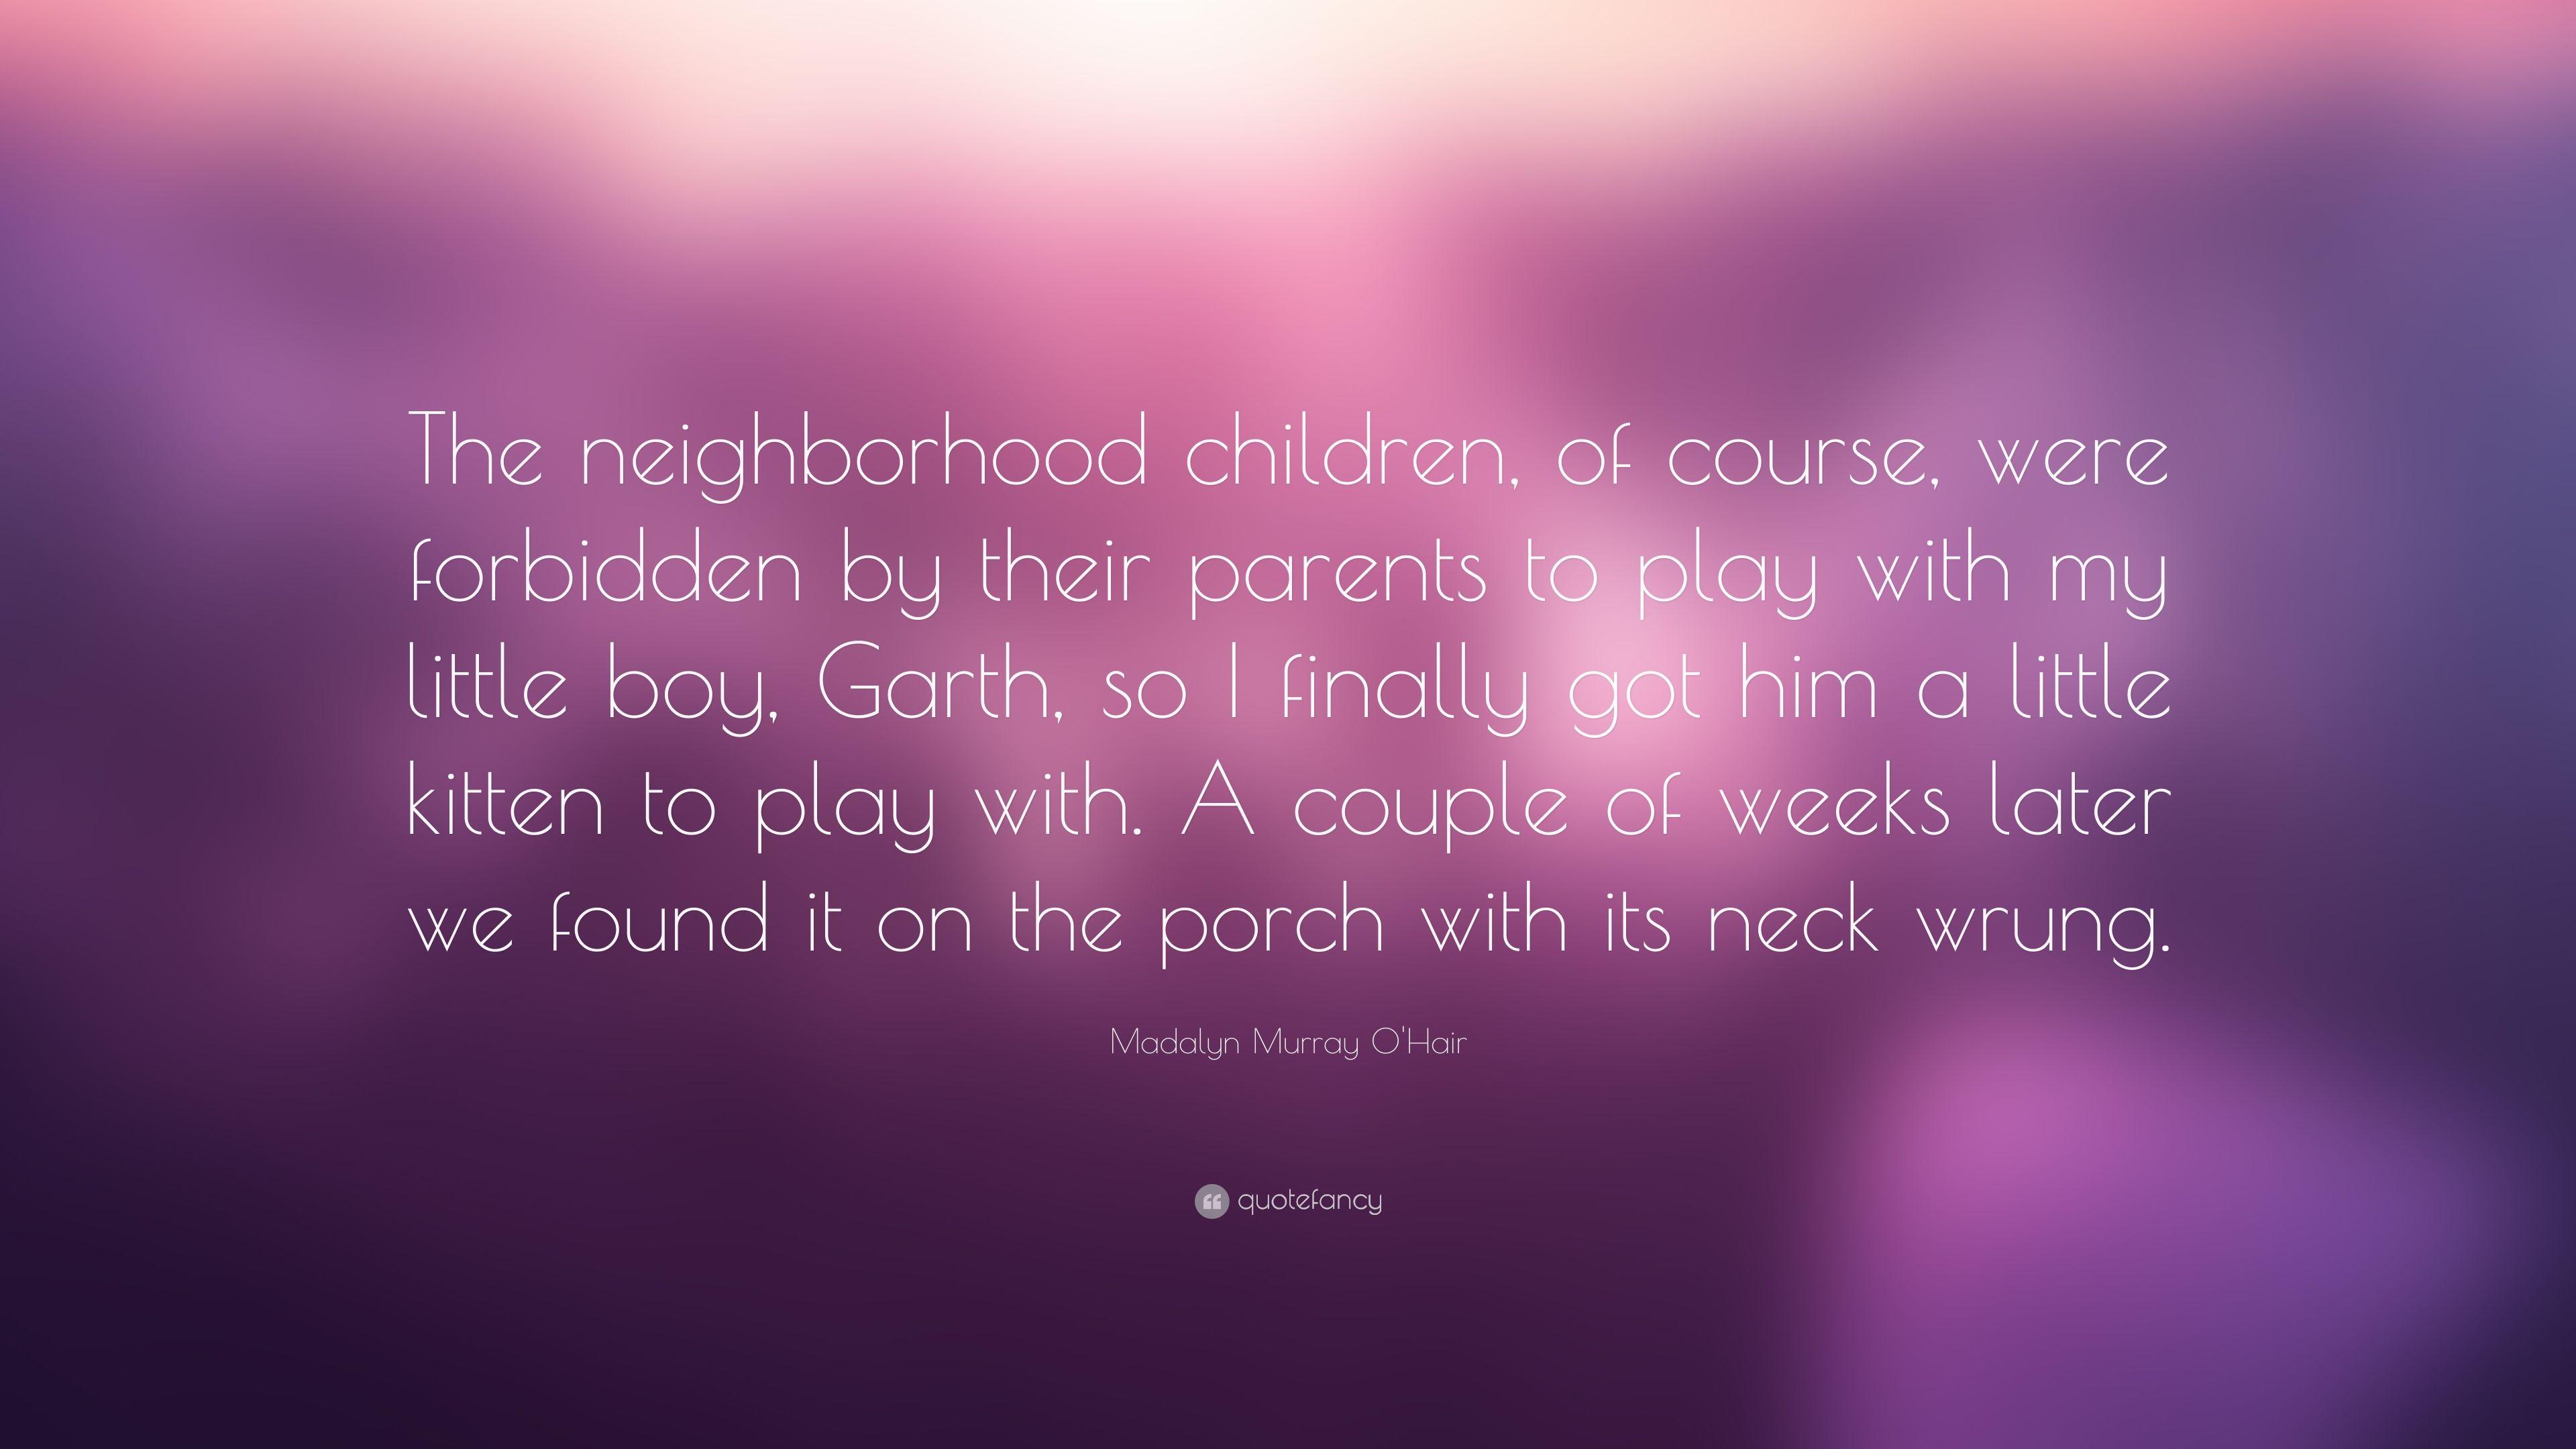 Madalyn Murray O'Hair Quote: “The neighborhood children, of course